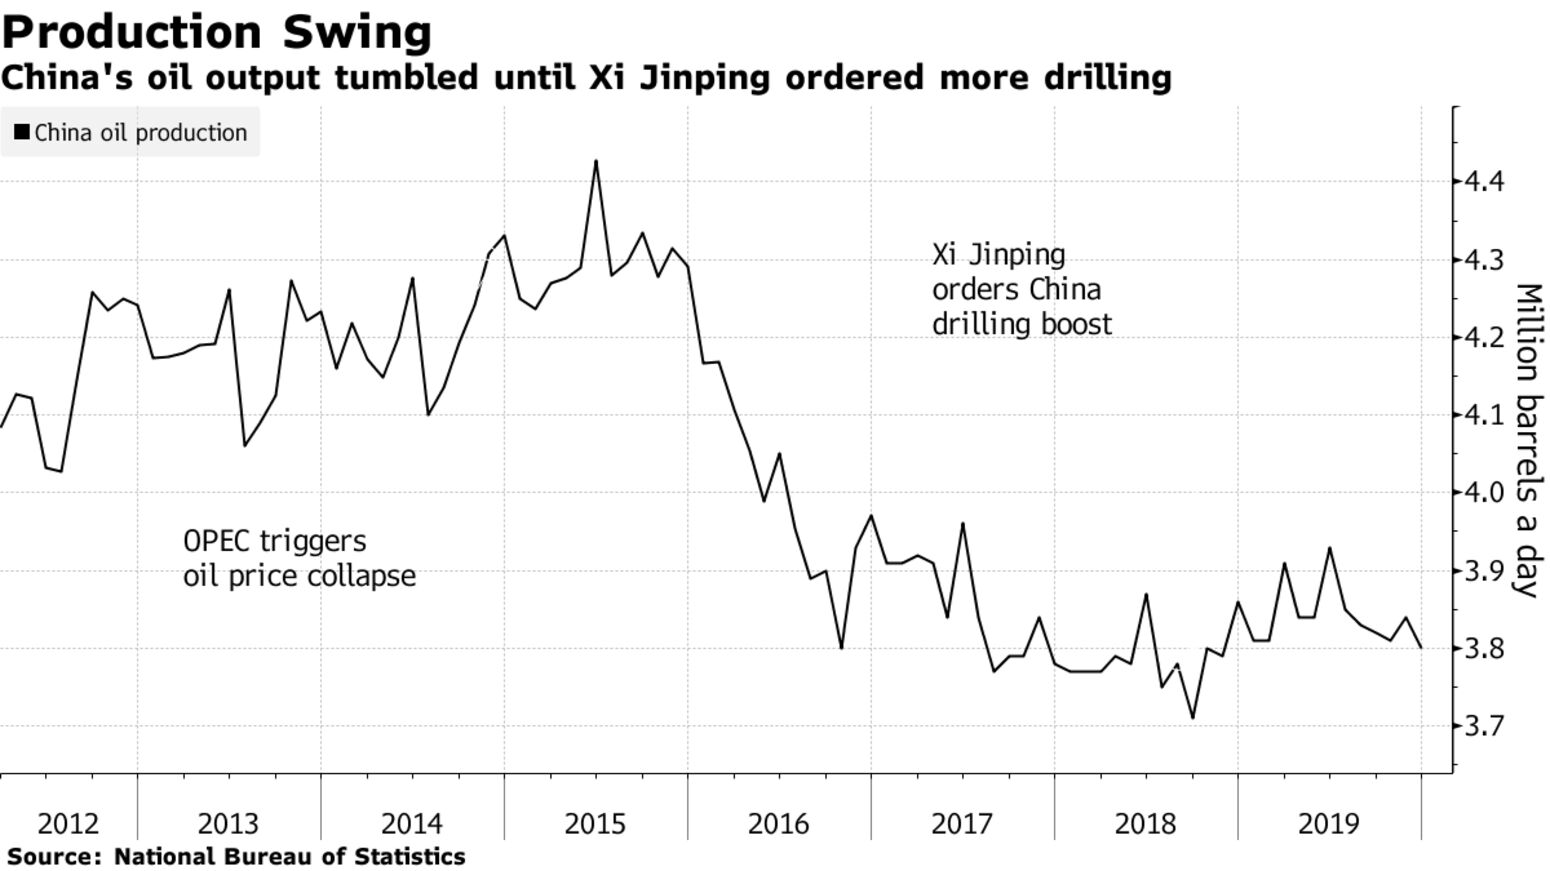 China's oil output tumbled until Xi Jinping ordered more drilling